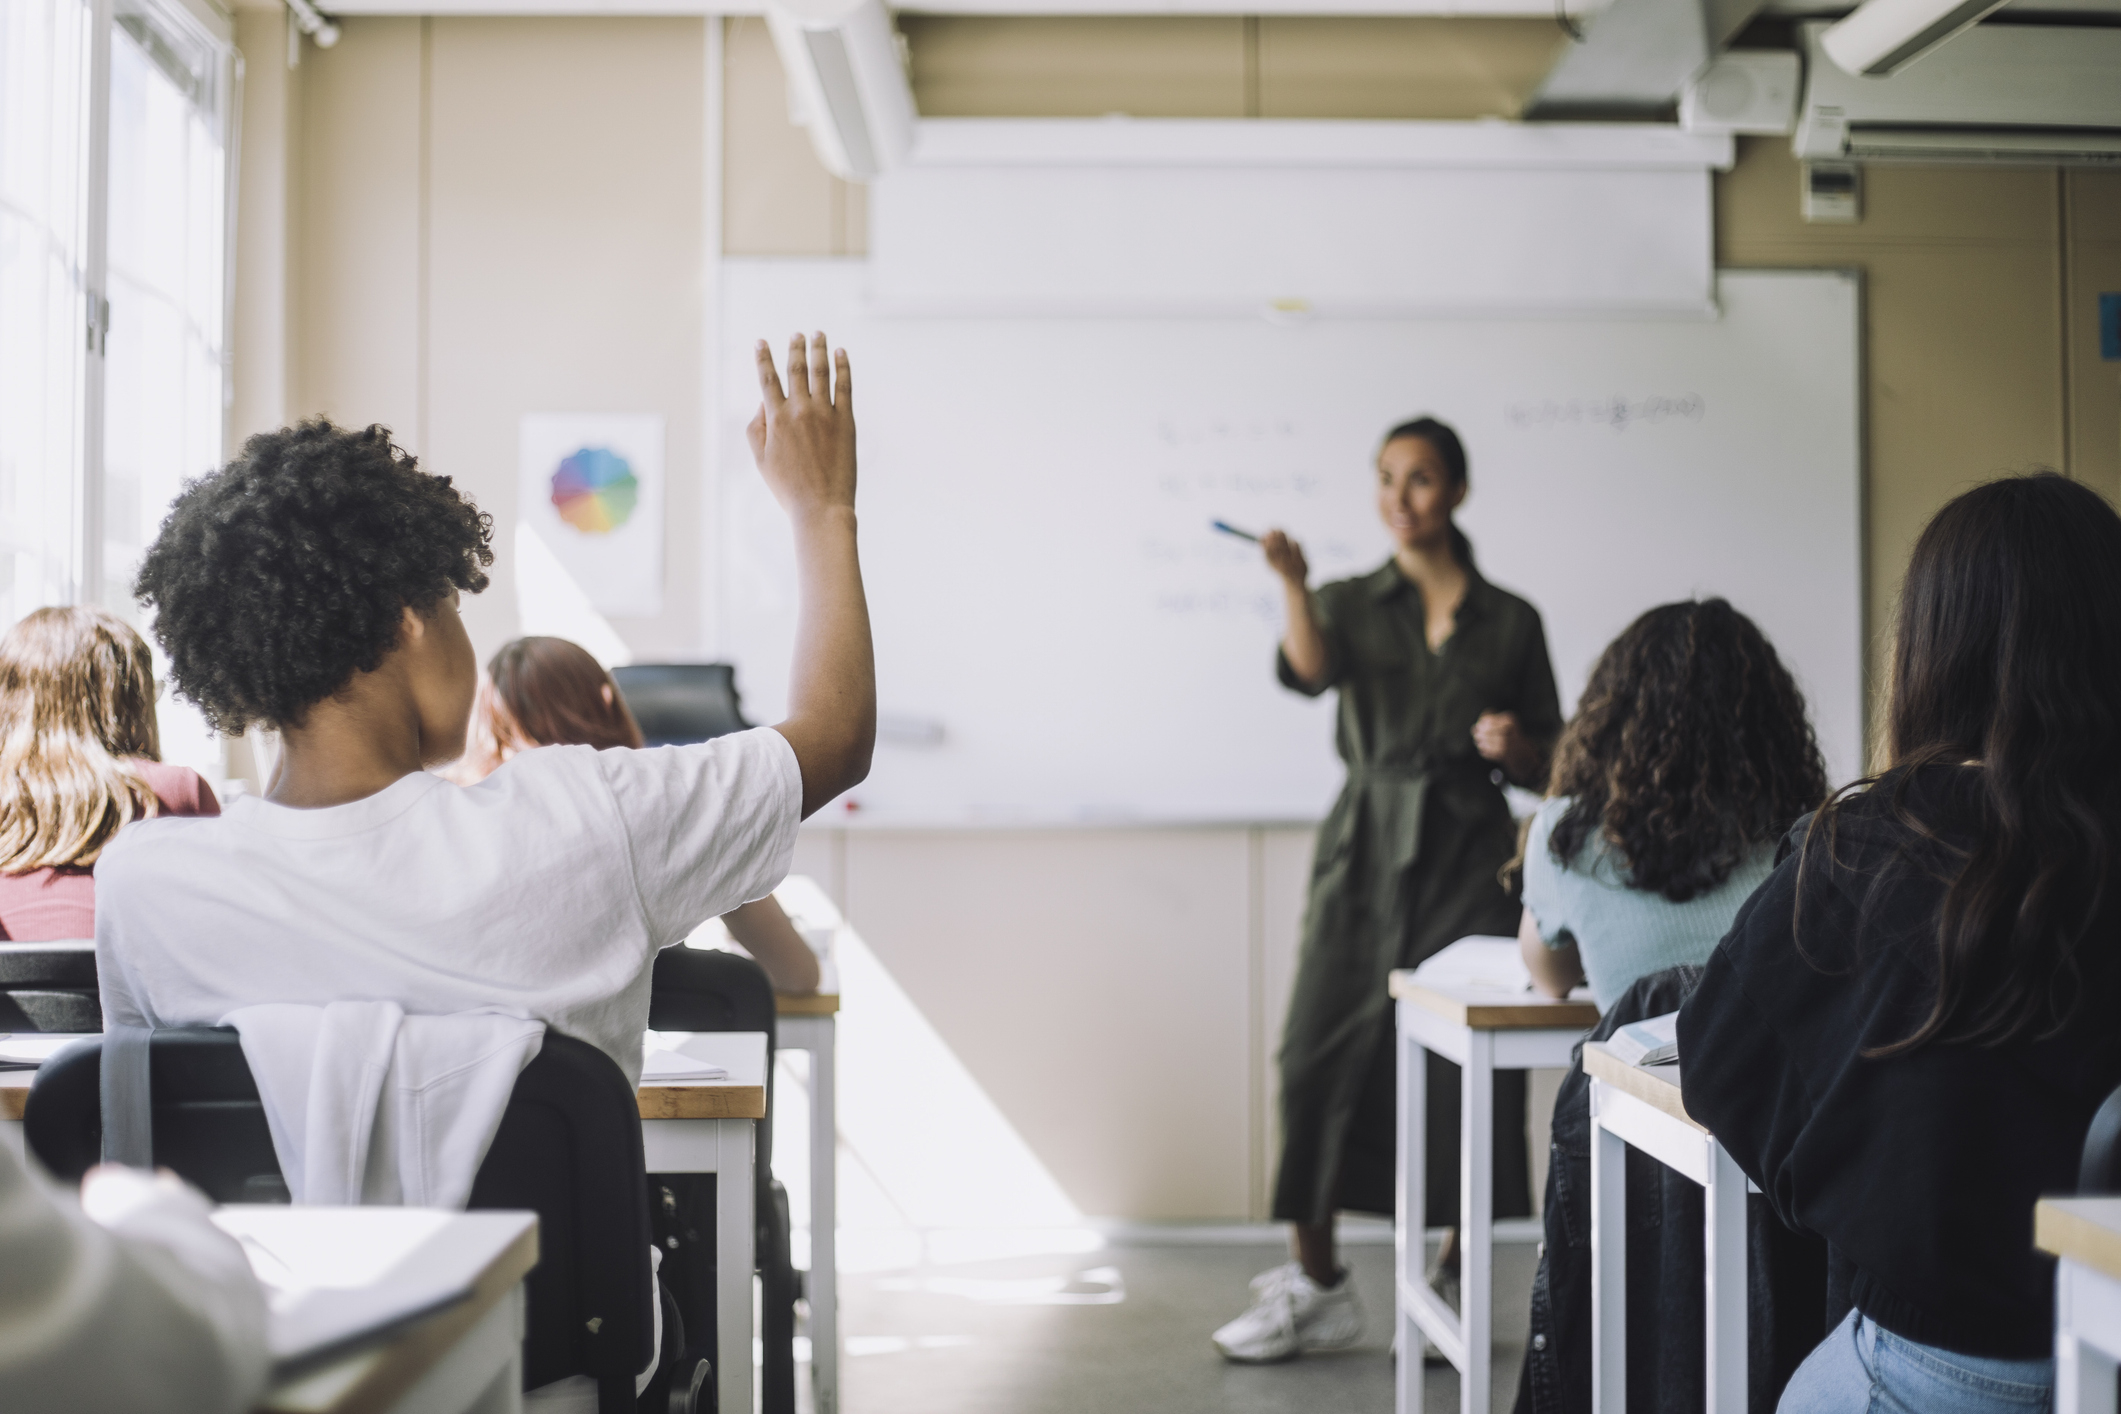 A student raises their hand in a classroom while the teacher engages with the class